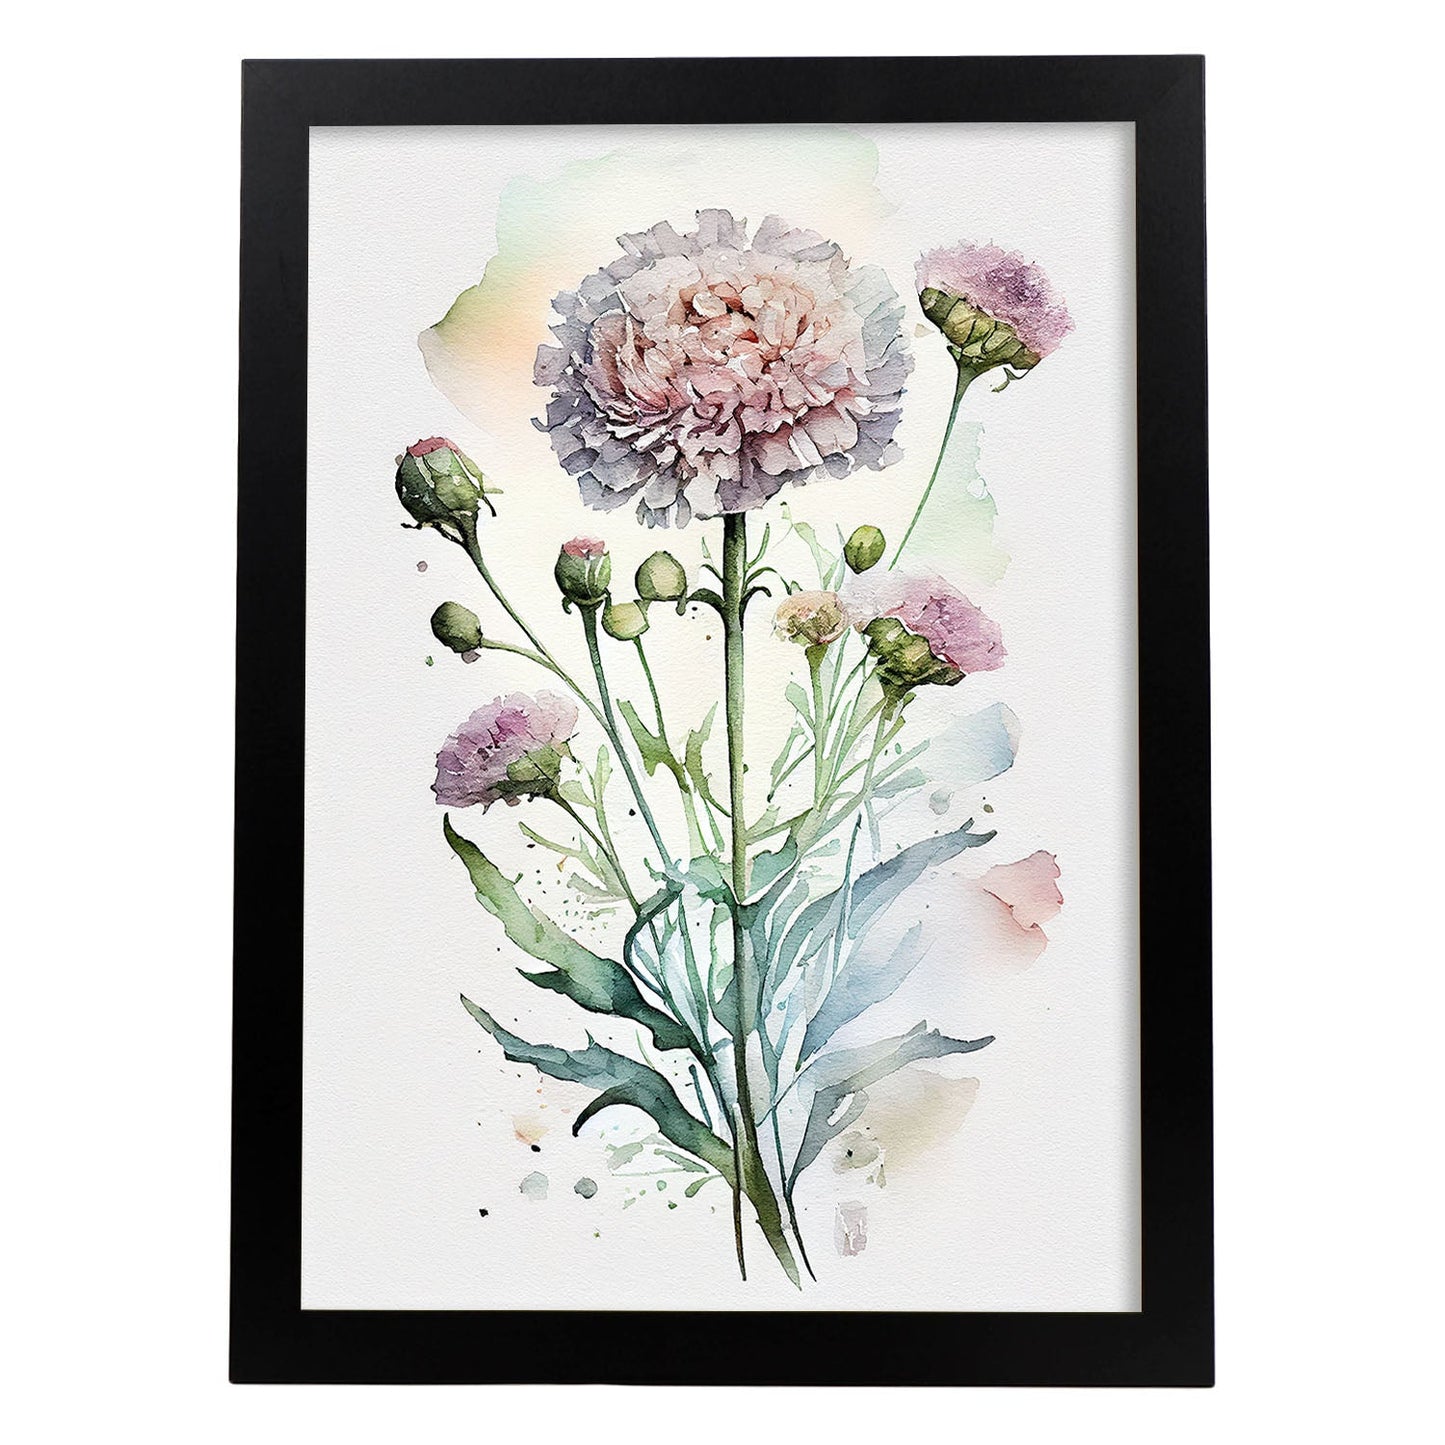 Nacnic watercolor minmal Scabiosa_3. Aesthetic Wall Art Prints for Bedroom or Living Room Design.